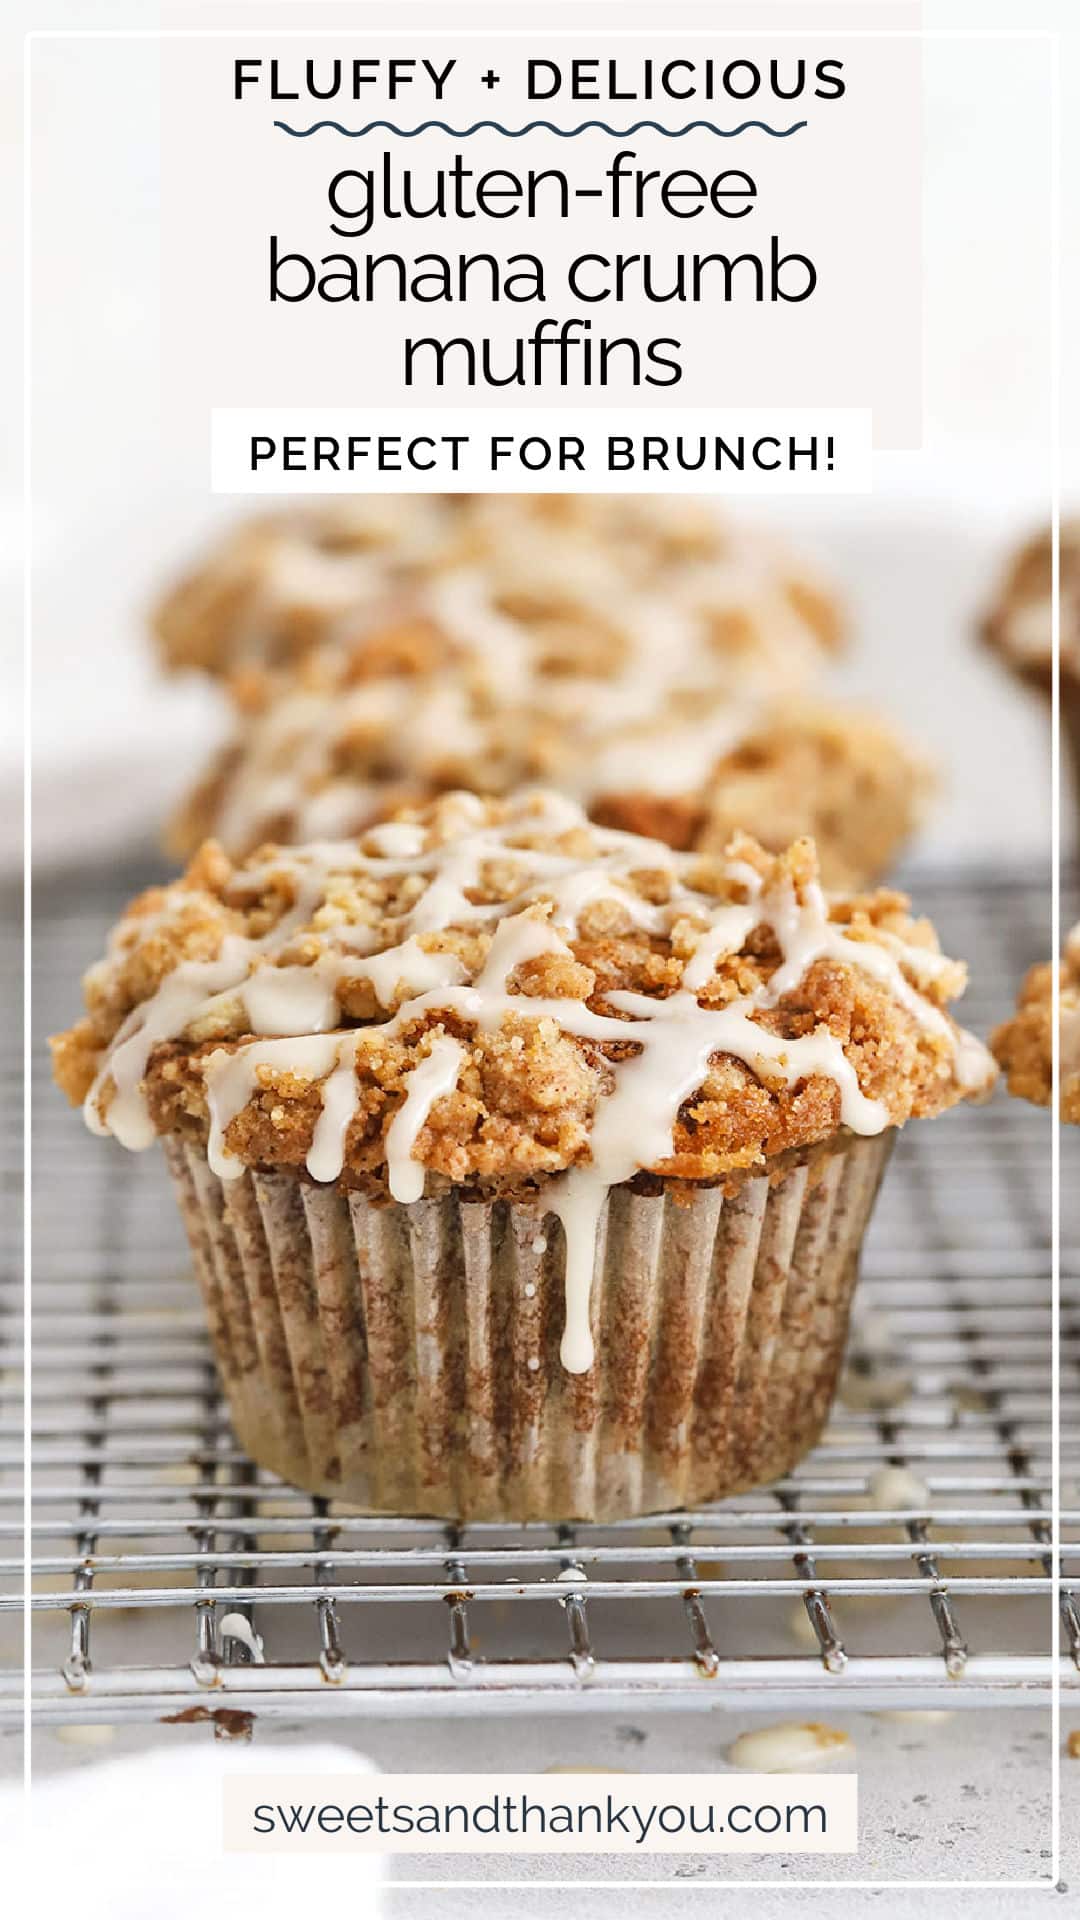 Gluten-Free Cinnamon Banana Crumb Muffins are your new brunch favorite. Fluffy gluten-free cinnamon banana muffins topped with cinnamon streusel topping. It's a double-dose of cinnamon goodness! // gluten-free banana streusel muffins / gluten-free banana muffins with streusel topping / gluten-free banana muffins with crumb topping / gluten-free cinnamon banana muffins recipe / gluten-free banana coffee cake muffins / gluten-free banana muffins recipe / gluten-free muffins